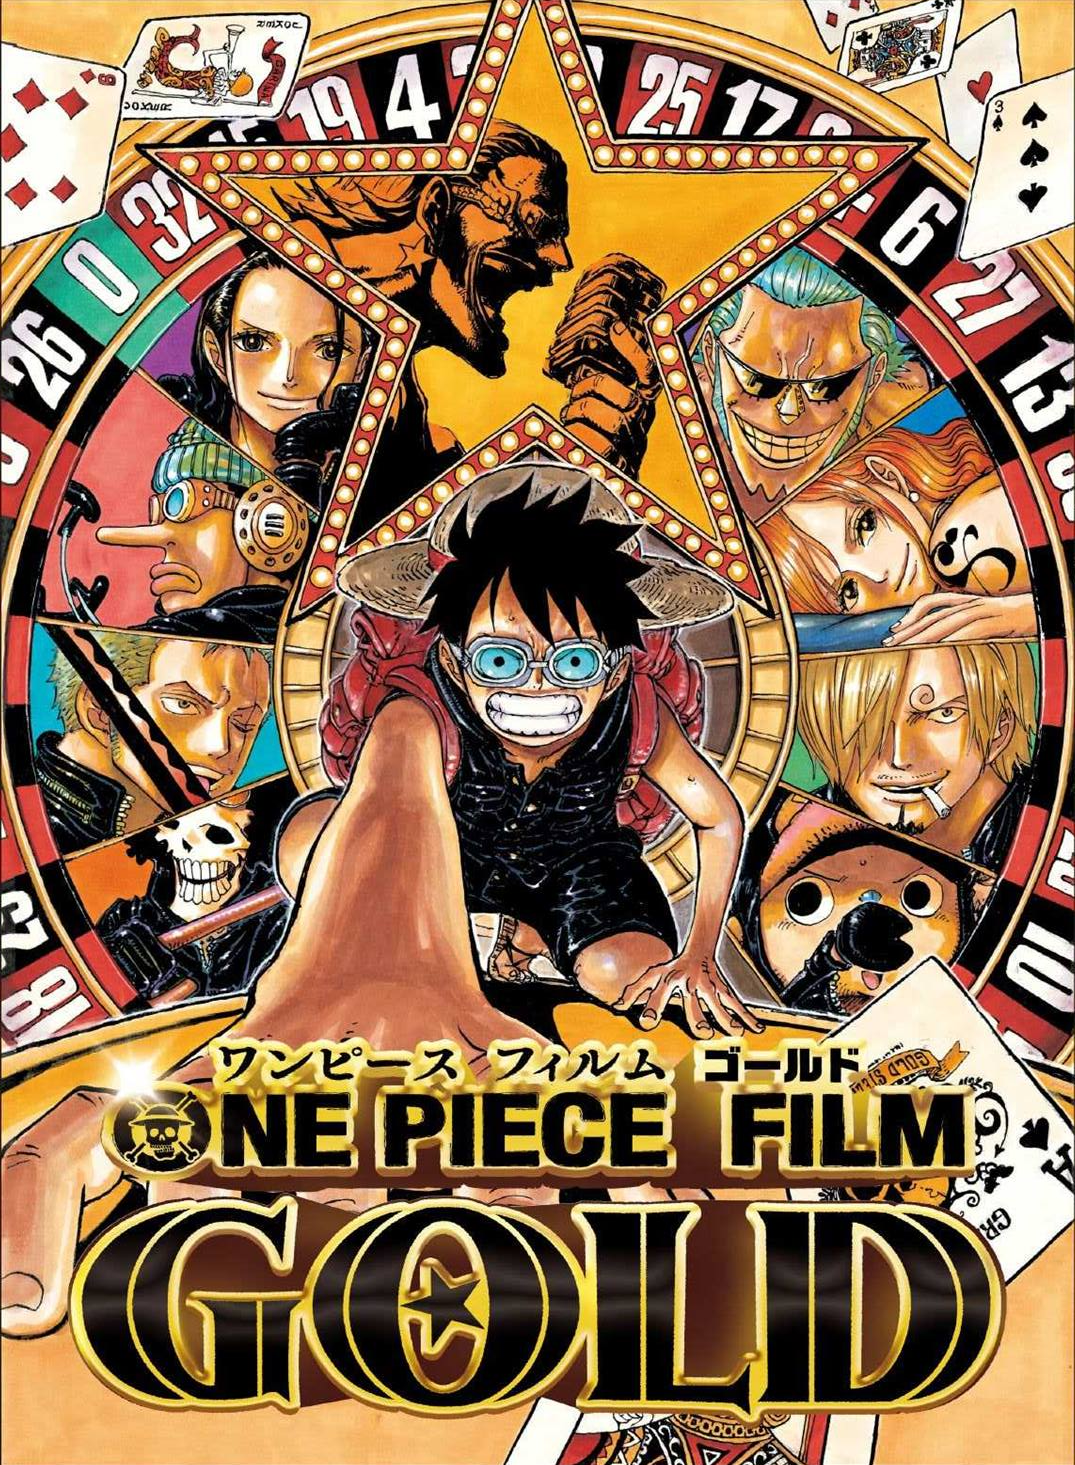 download one piece all episodes